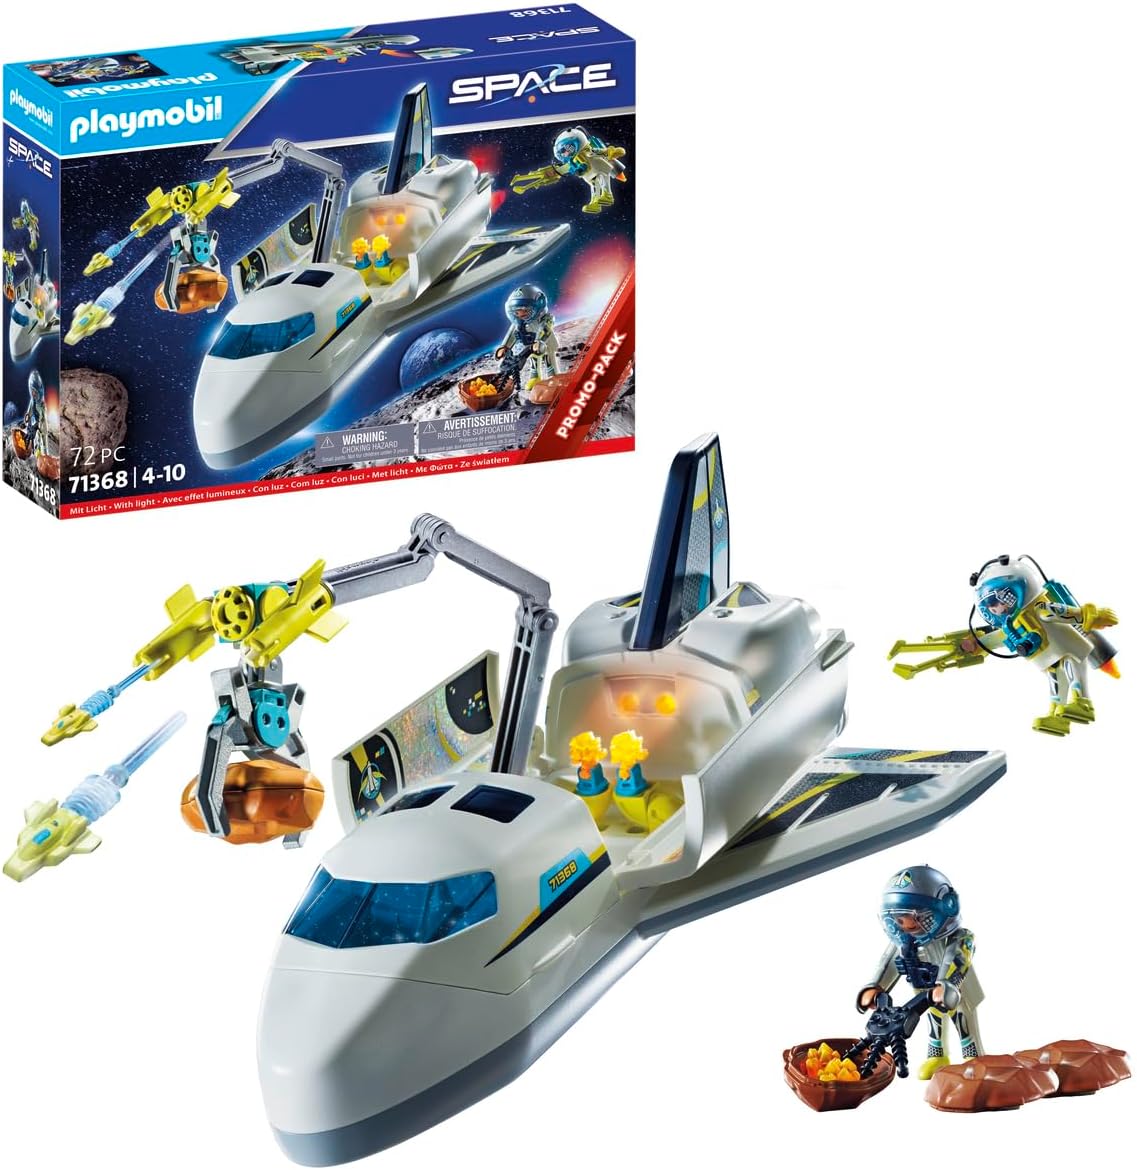 PLAYMOBIL Space Promo Pack 71368 Space Shuttle on Mission, Space Shuttle, Space, Astronauts in Research Equipment, Toy for Children from 4 Years